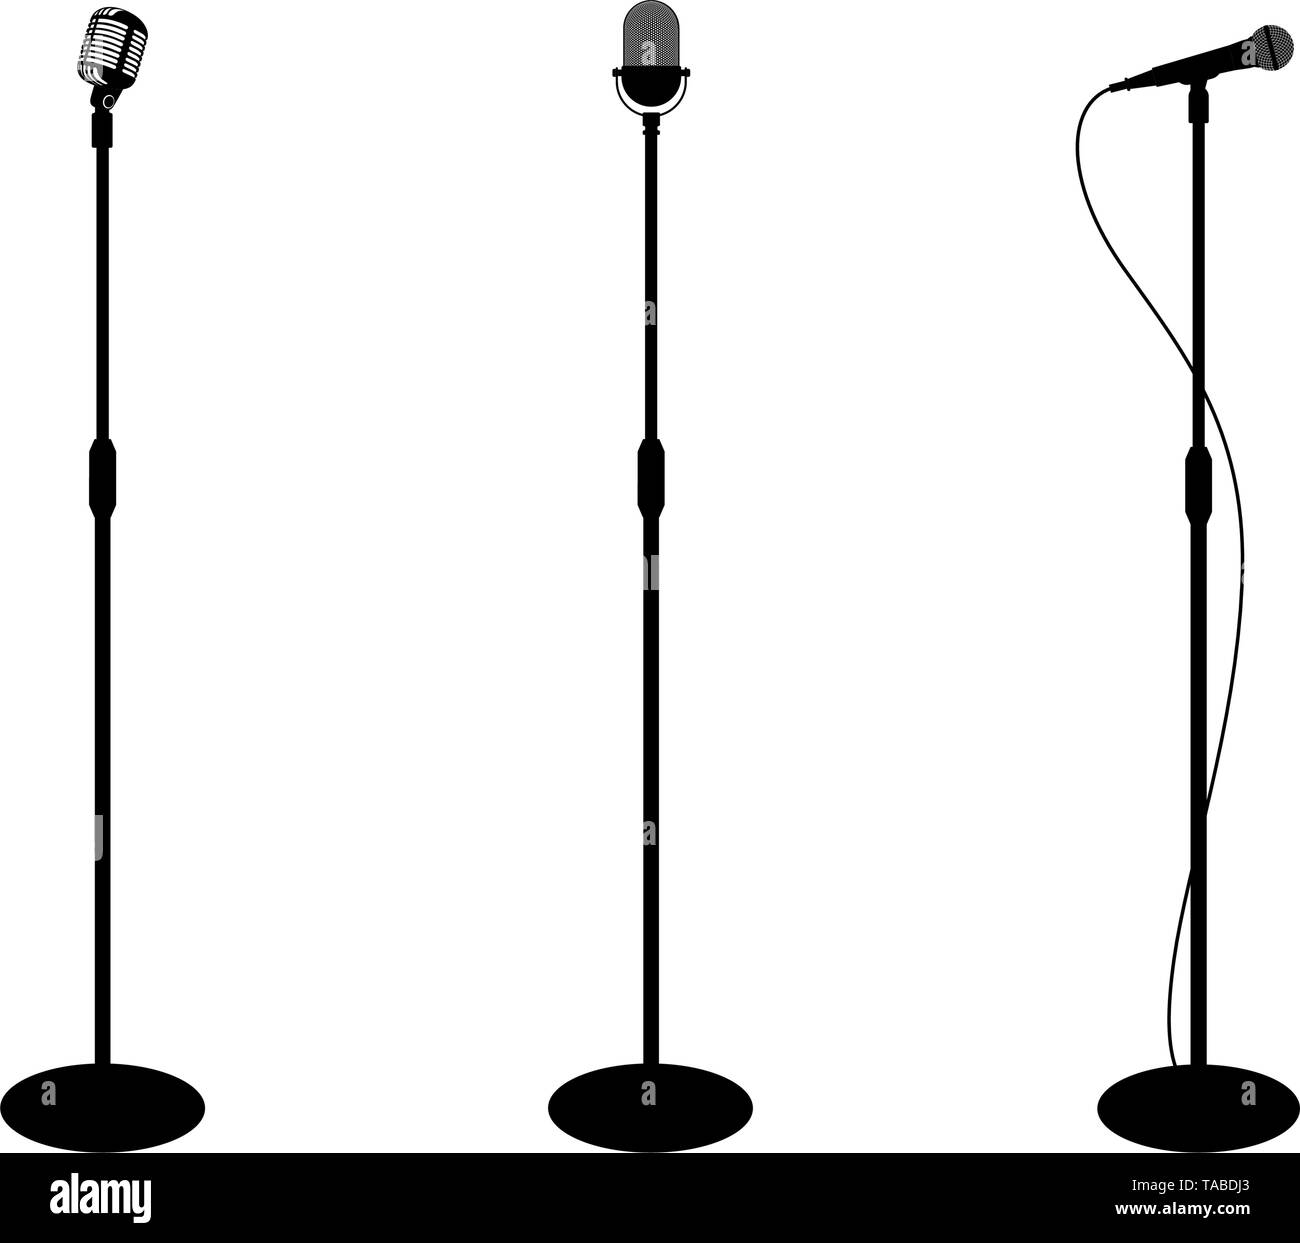 Three microphones on counter. White background. Silhouette microphone. Music icon, mic. Flat design, vector illustration Stock Vector